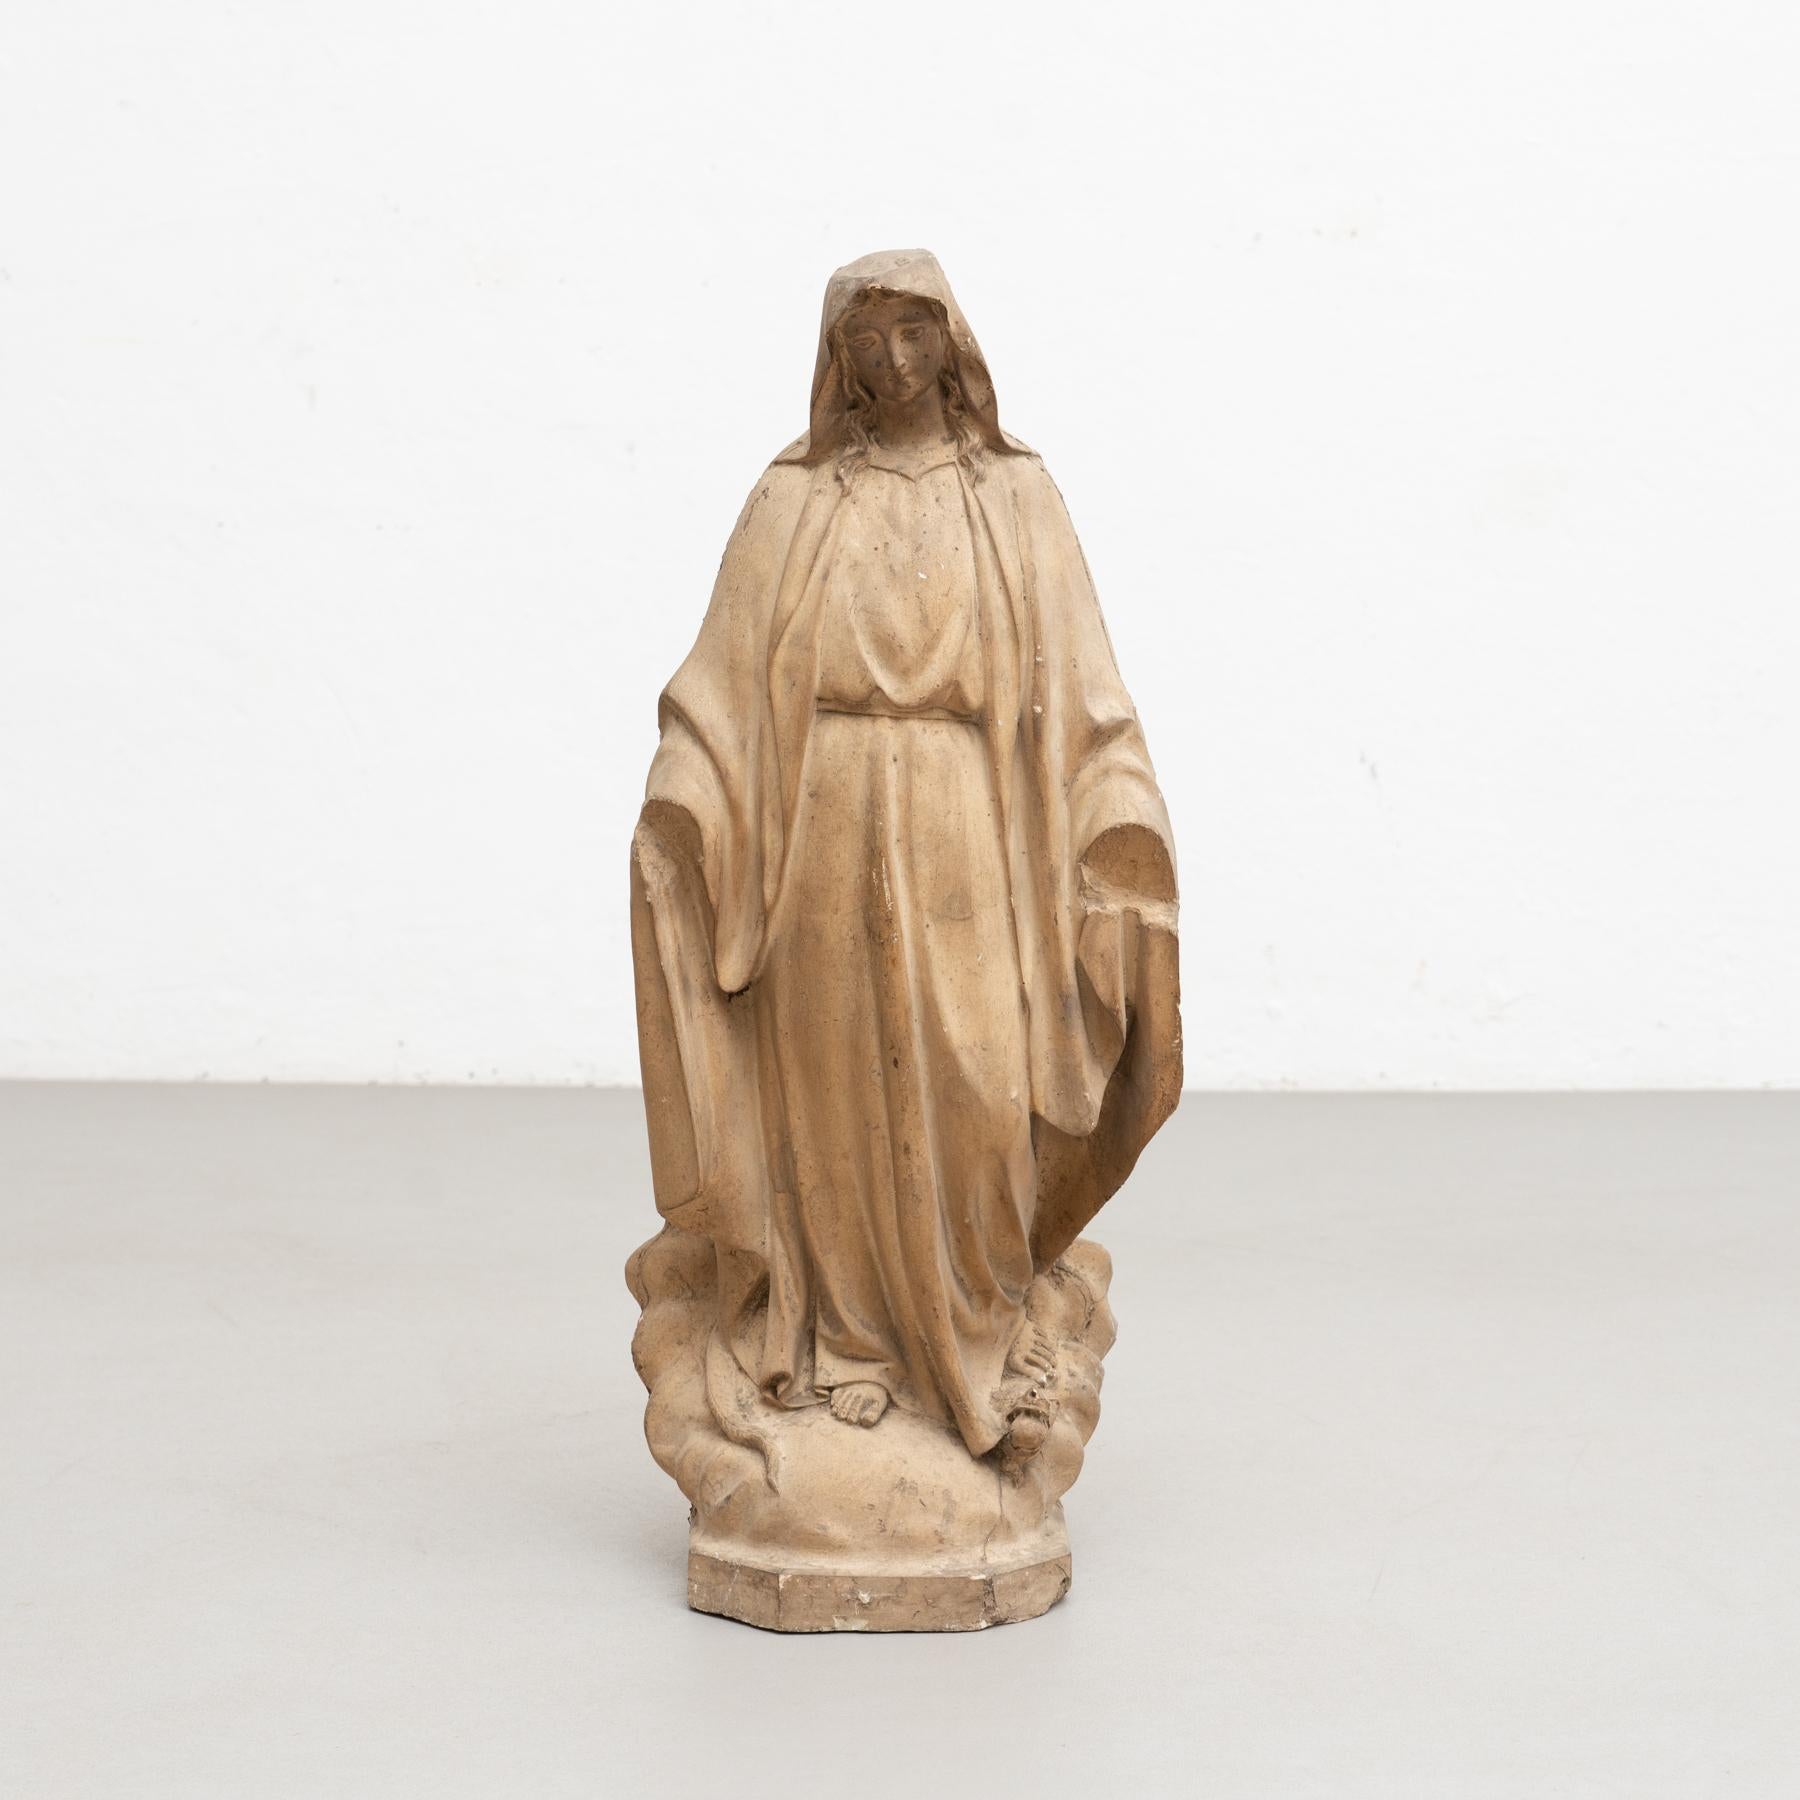 Traditional religious plaster figure of a virgin.

Made in traditional Catalan atelier in Olot, Spain, circa 1950.

In original condition, with minor wear consistent with age and use, preserving a beautiful patina.

Olot has a long tradition